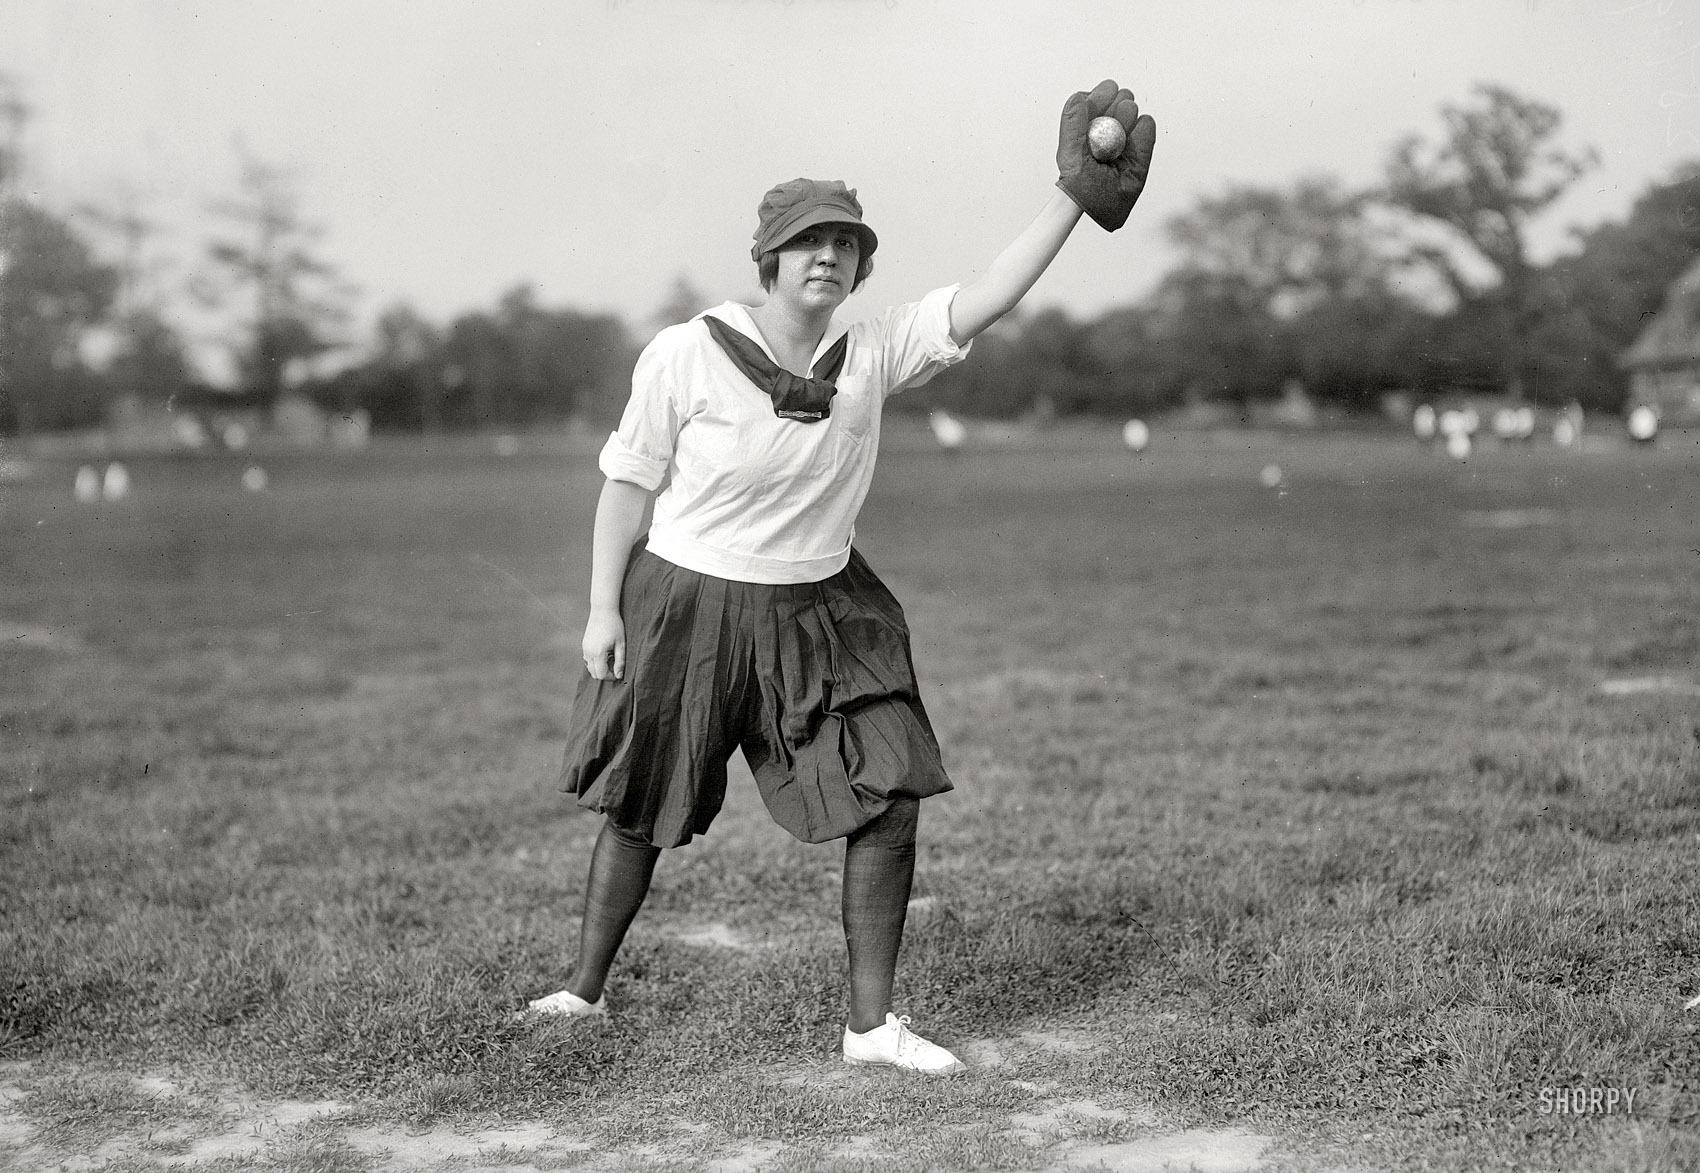 "H. Kaczmarek, woman baseball player." Her teammates included Belle North and Regina Gross. 5x7 glass negative, Bain News Service. View full size.